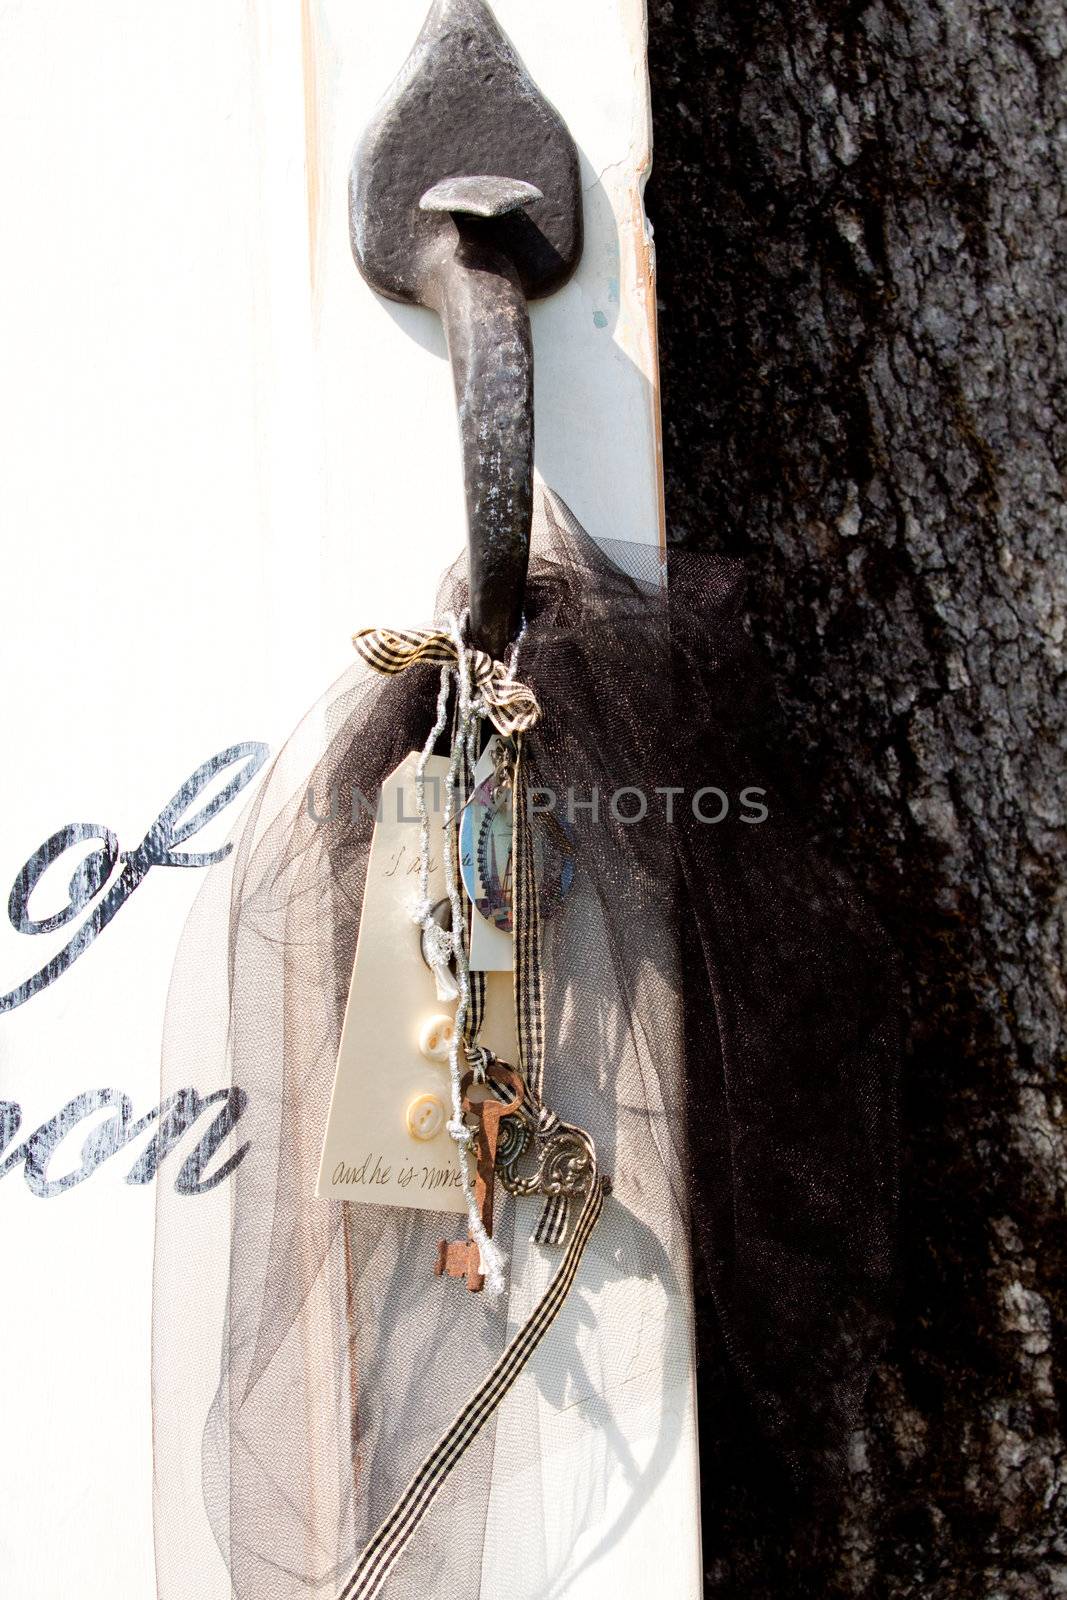 Items hang from a door handle at a wedding ceremony.